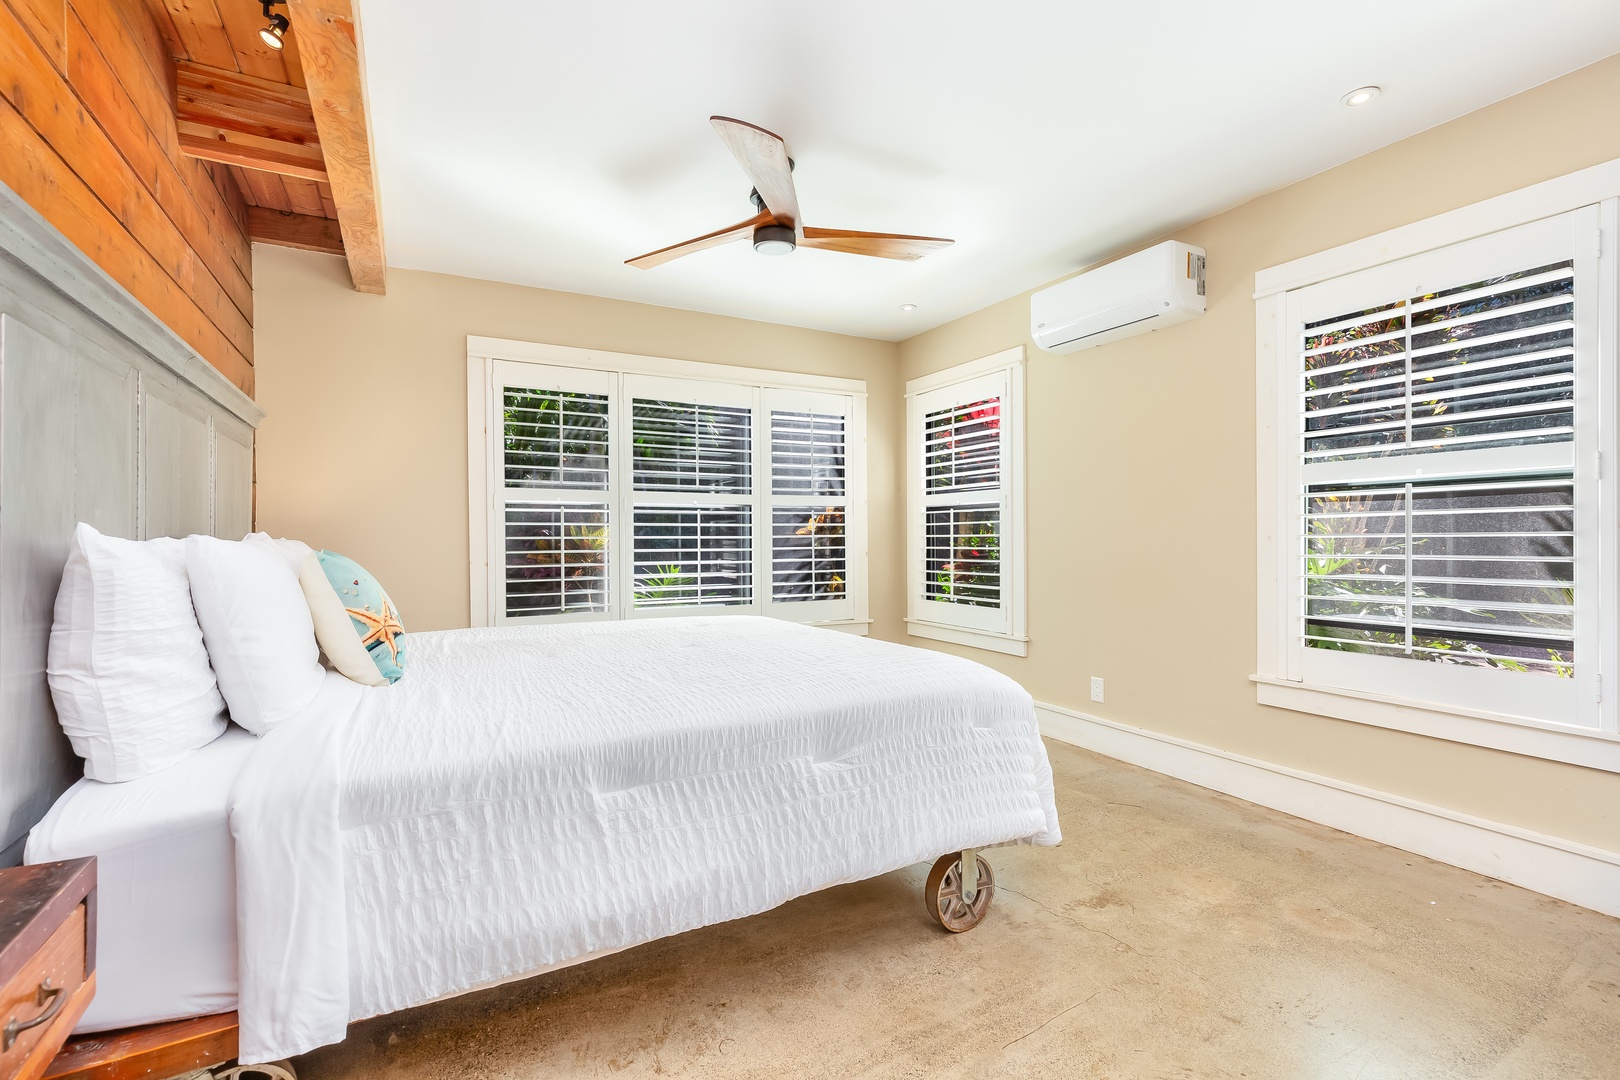 Haleiwa Vacation Rentals, Mele Makana - The primary bedroom is downstairs and has a king bed, ceiling fan, central A/C, and garden views